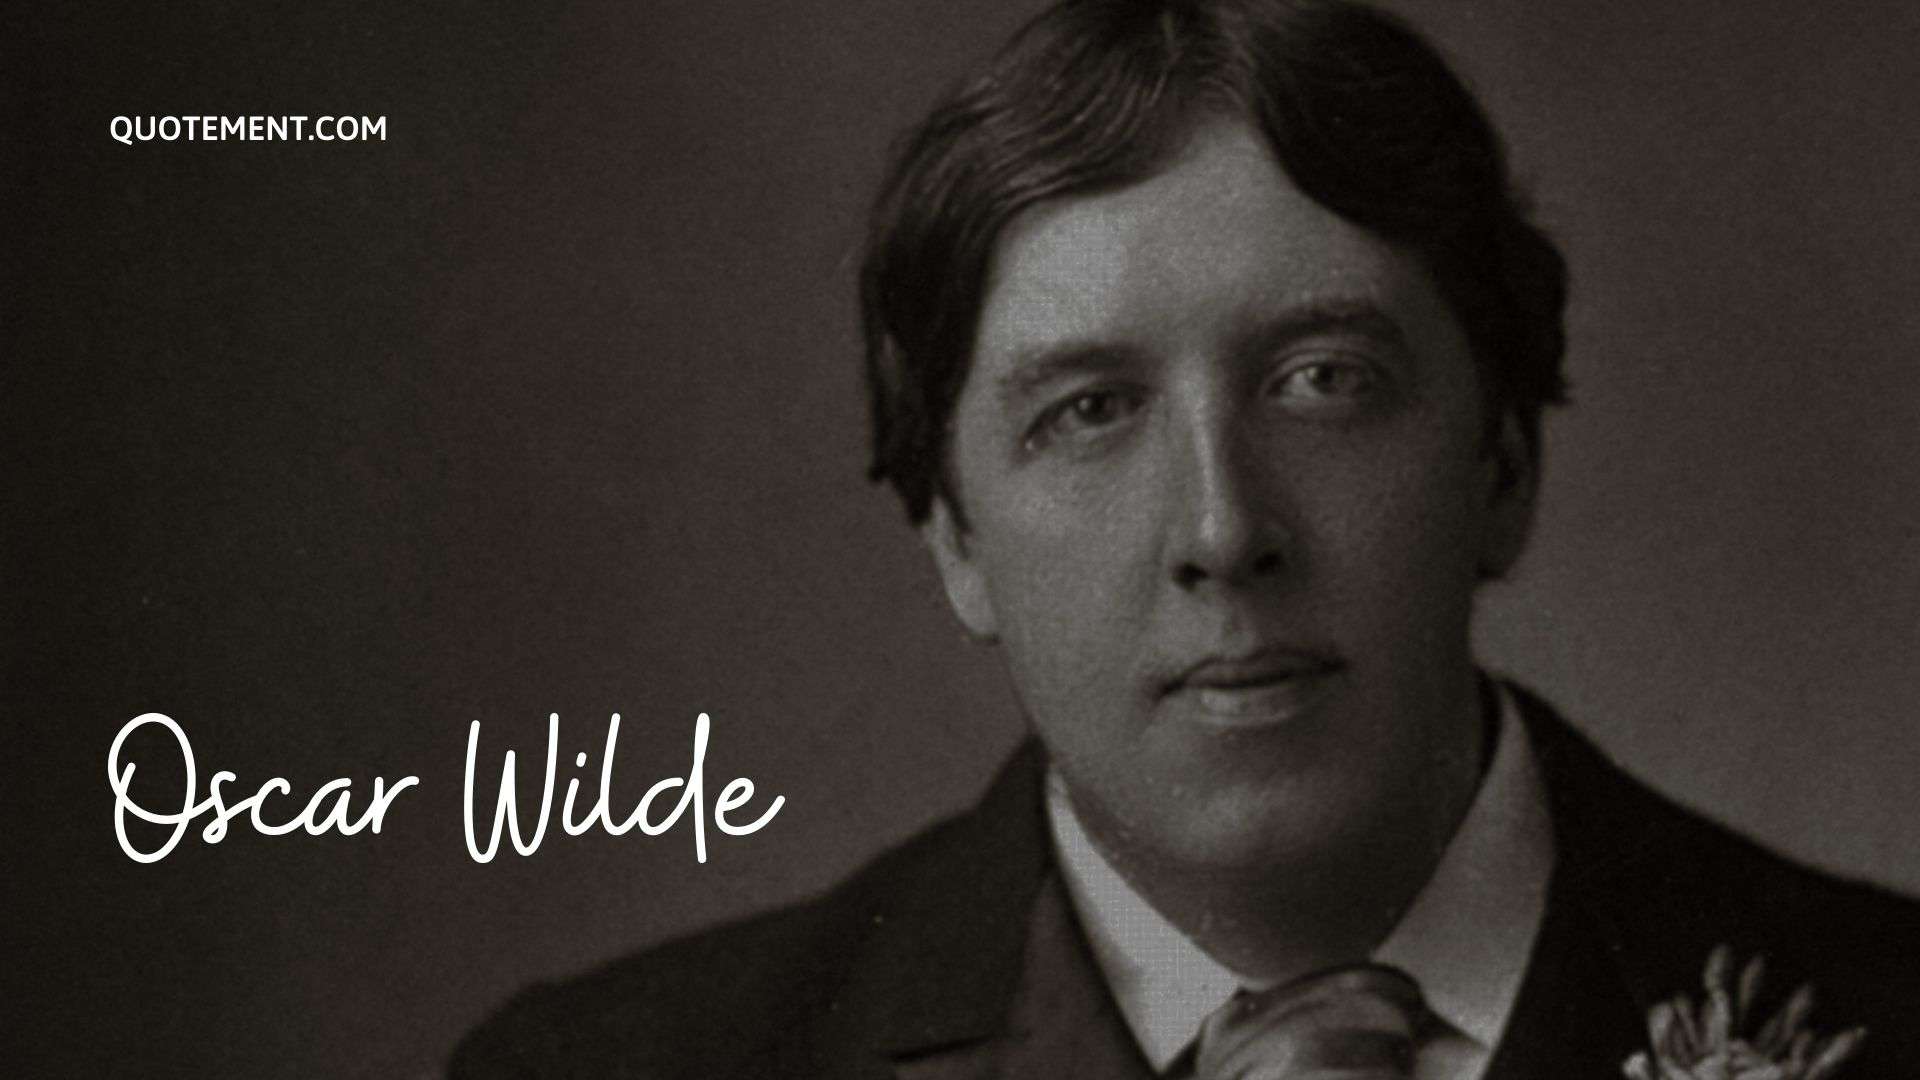 oscar wilde portrait and quotes